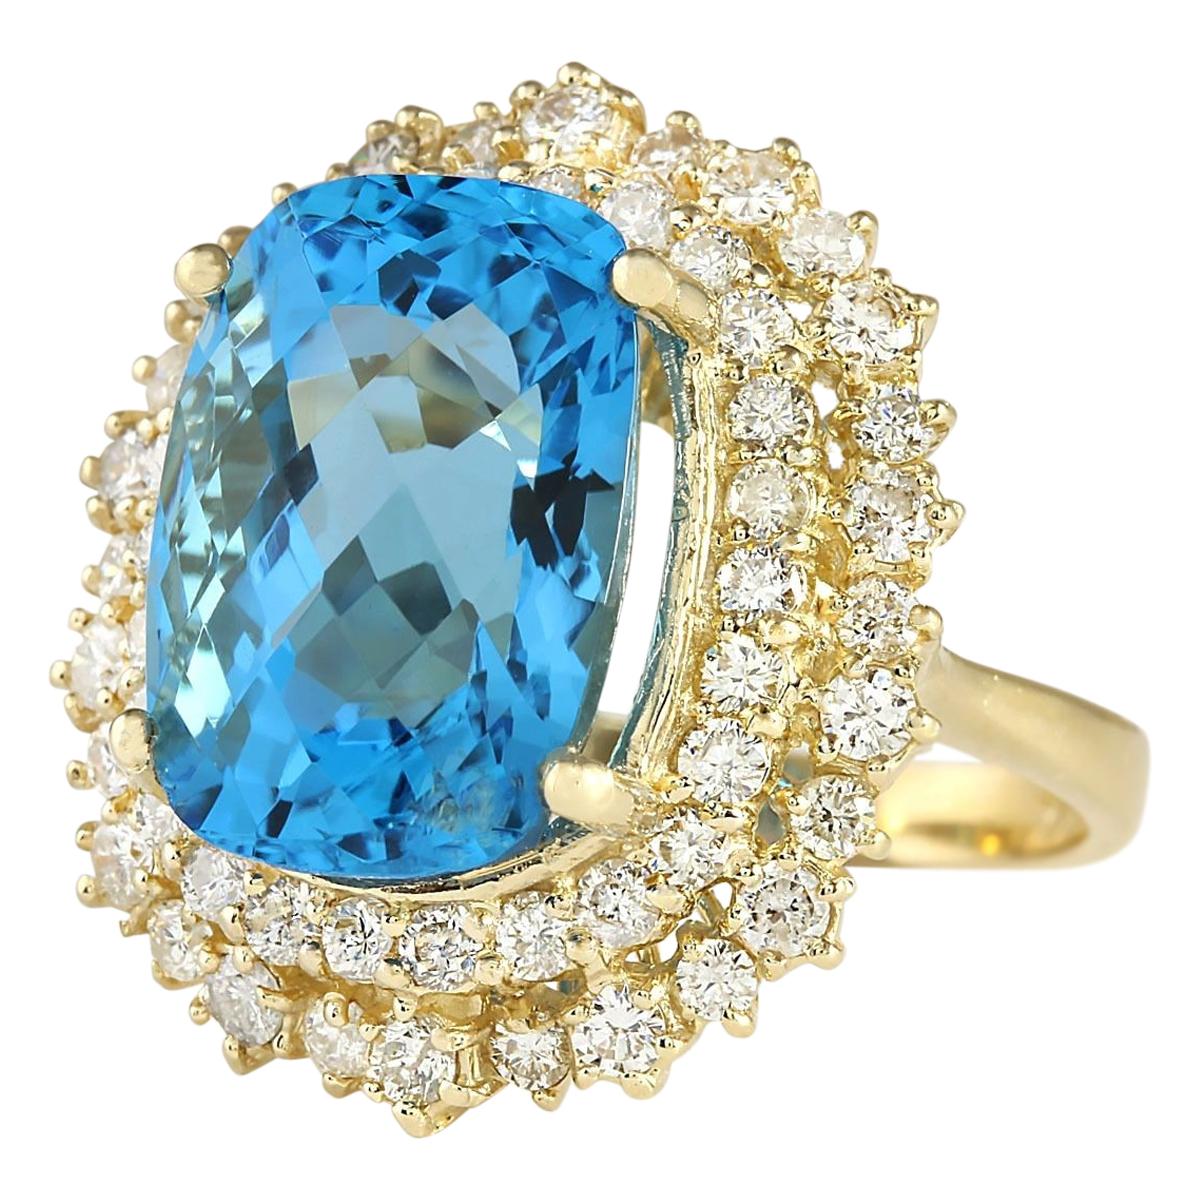 15.64 Carat Natural Topaz 14 Karat Yellow Gold Diamond Ring
Stamped: 14K Yellow Gold
Total Ring Weight: 9.8 Grams
Topaz Weight is 13.64 Carat (Measures: 15.00x11.00 mm)
Diamond Weight is 2.00 Carat
Color: F-G, Clarity: VS2-SI1
Face Measures: